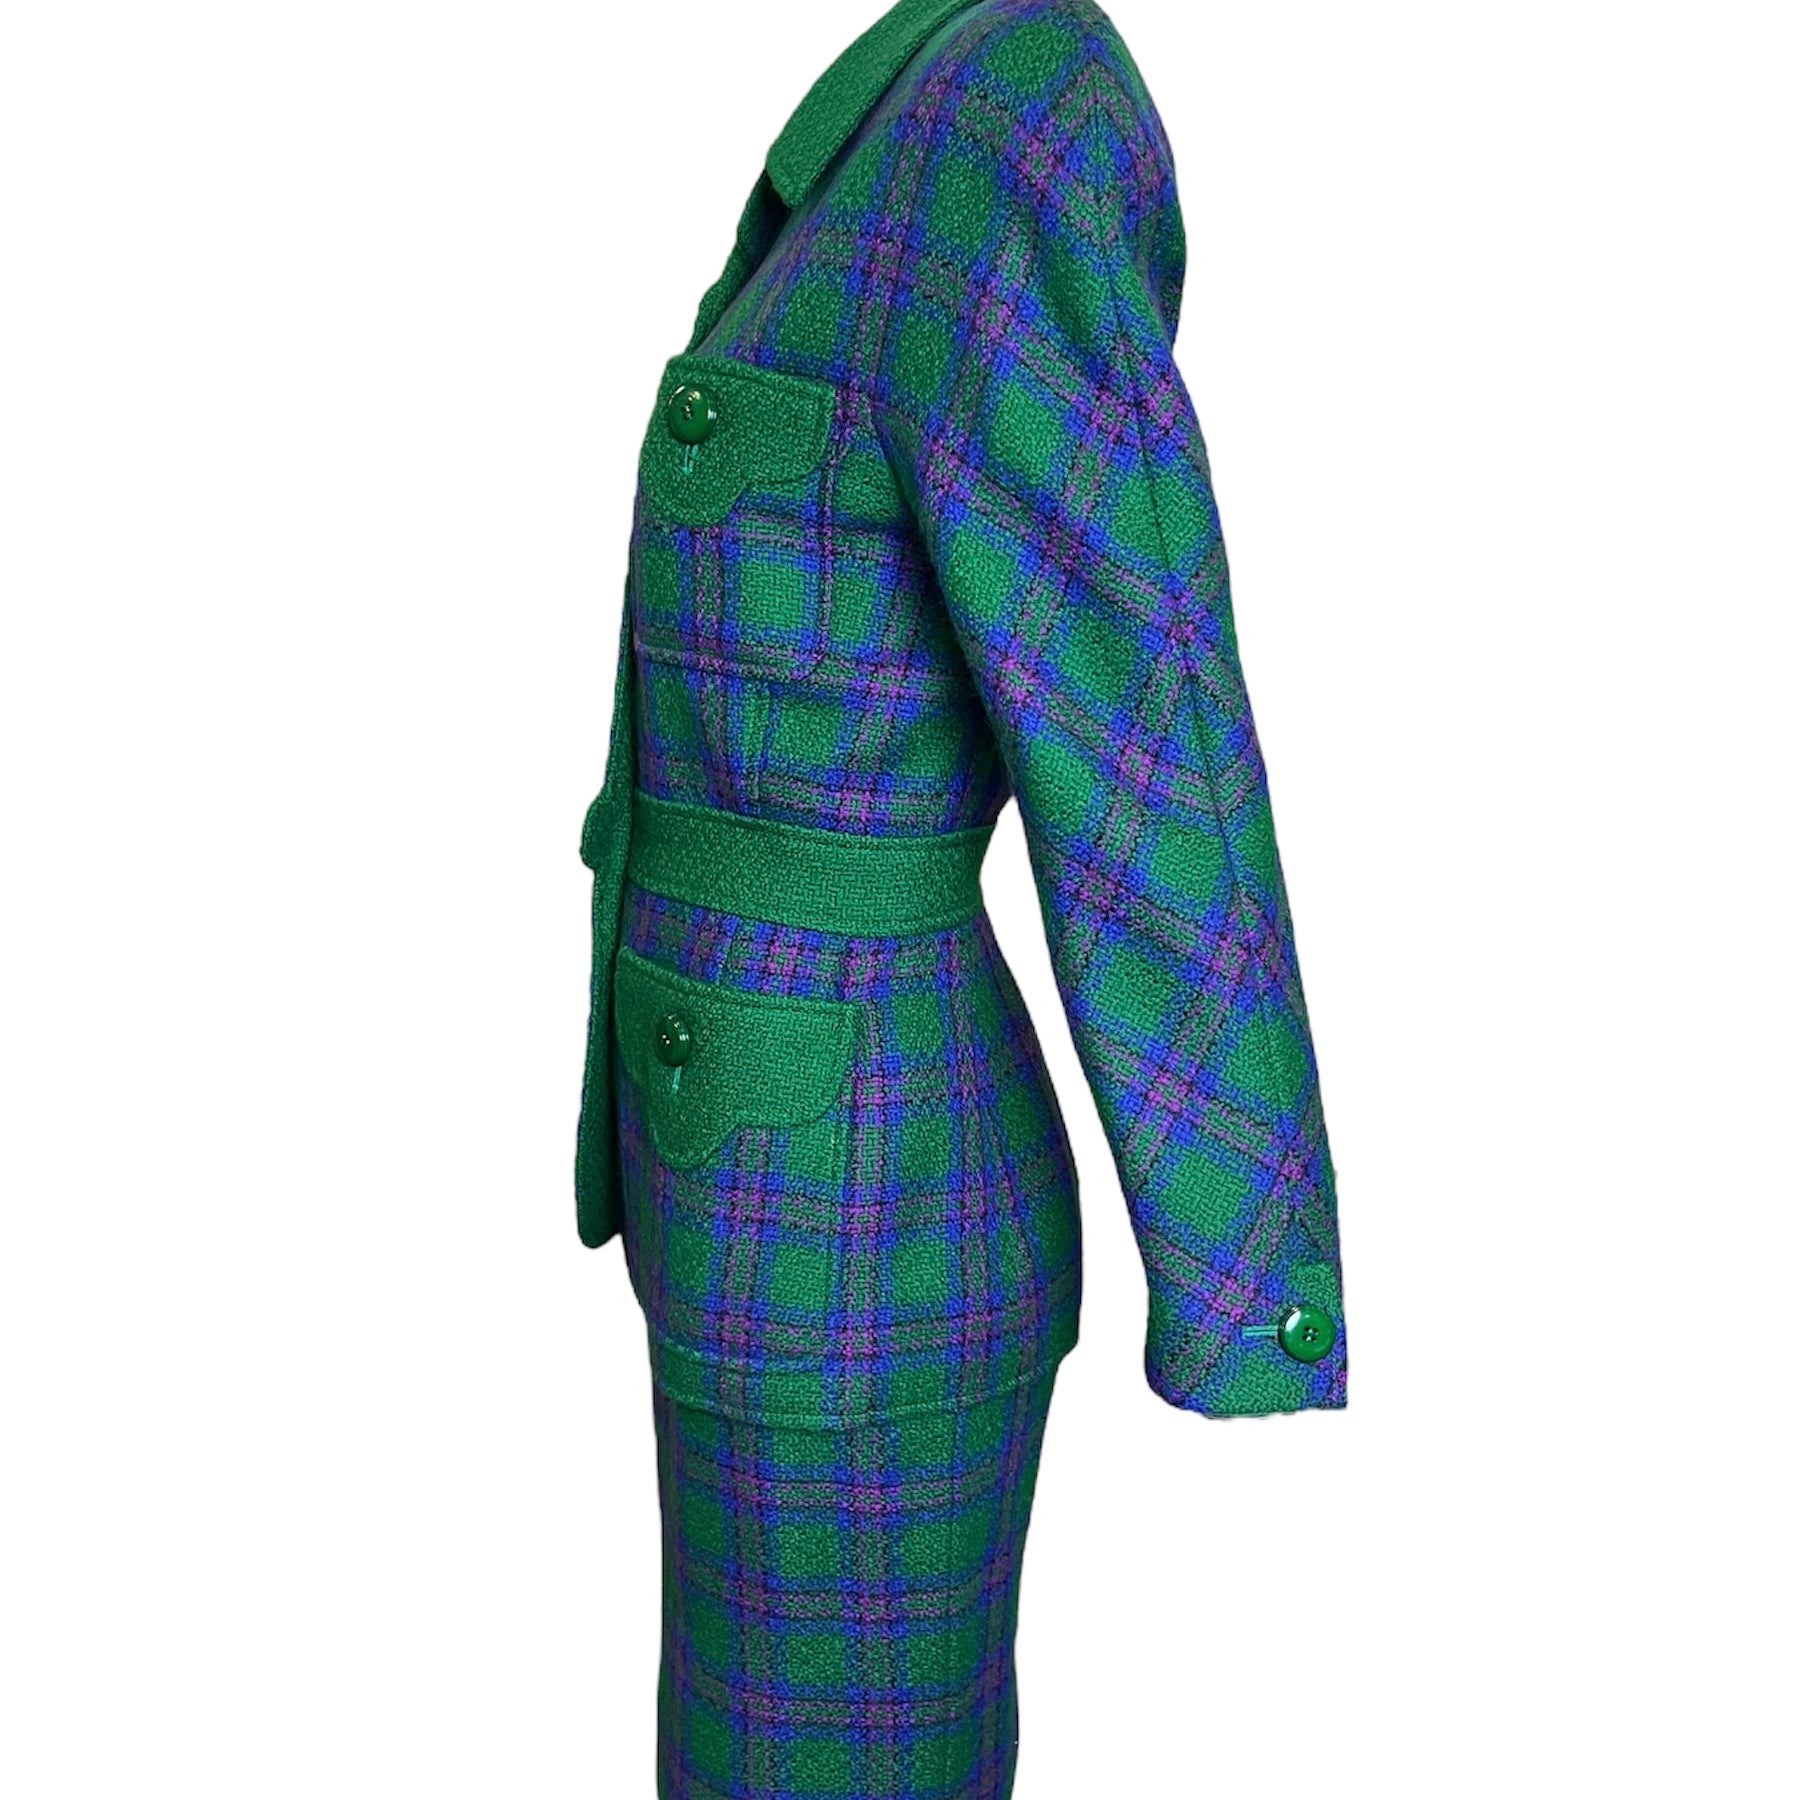  Valentino Boutique 80s Green, Purple and Fuschia Plaid  Skirt Suit Ensemble SIDE 2 of 7